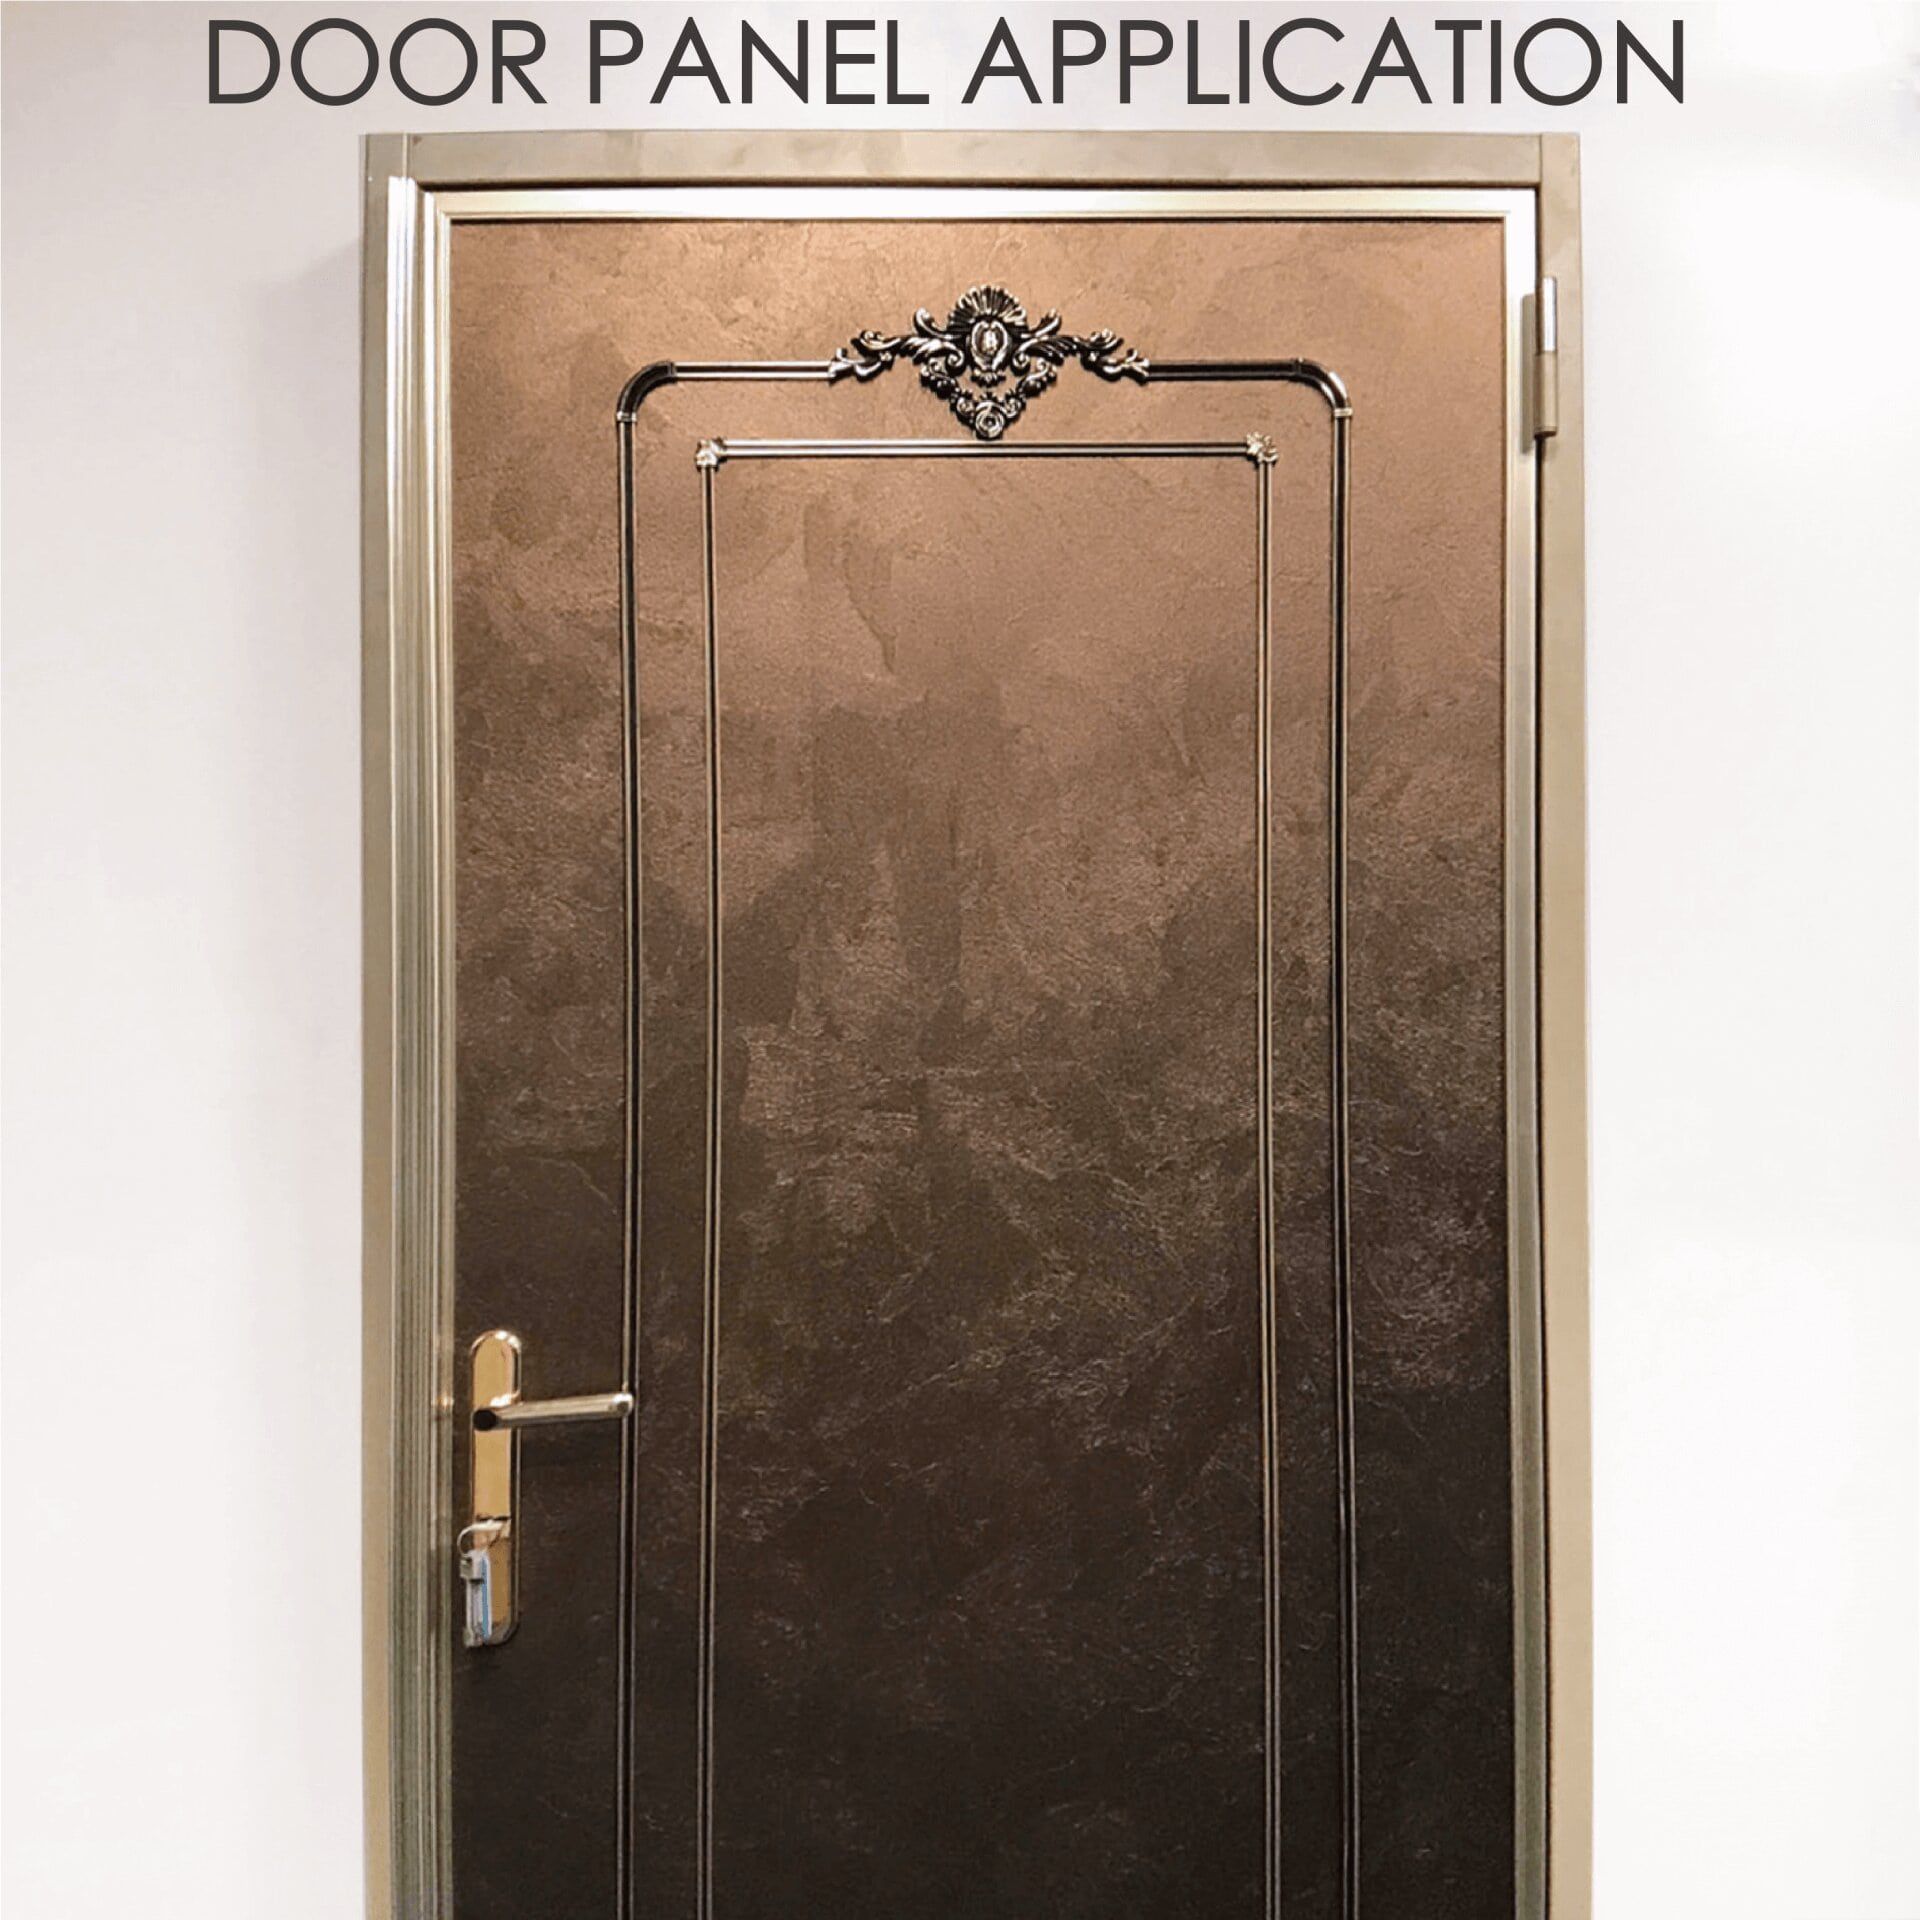 Replacing wooden door with laminated metal can increase safety and durability